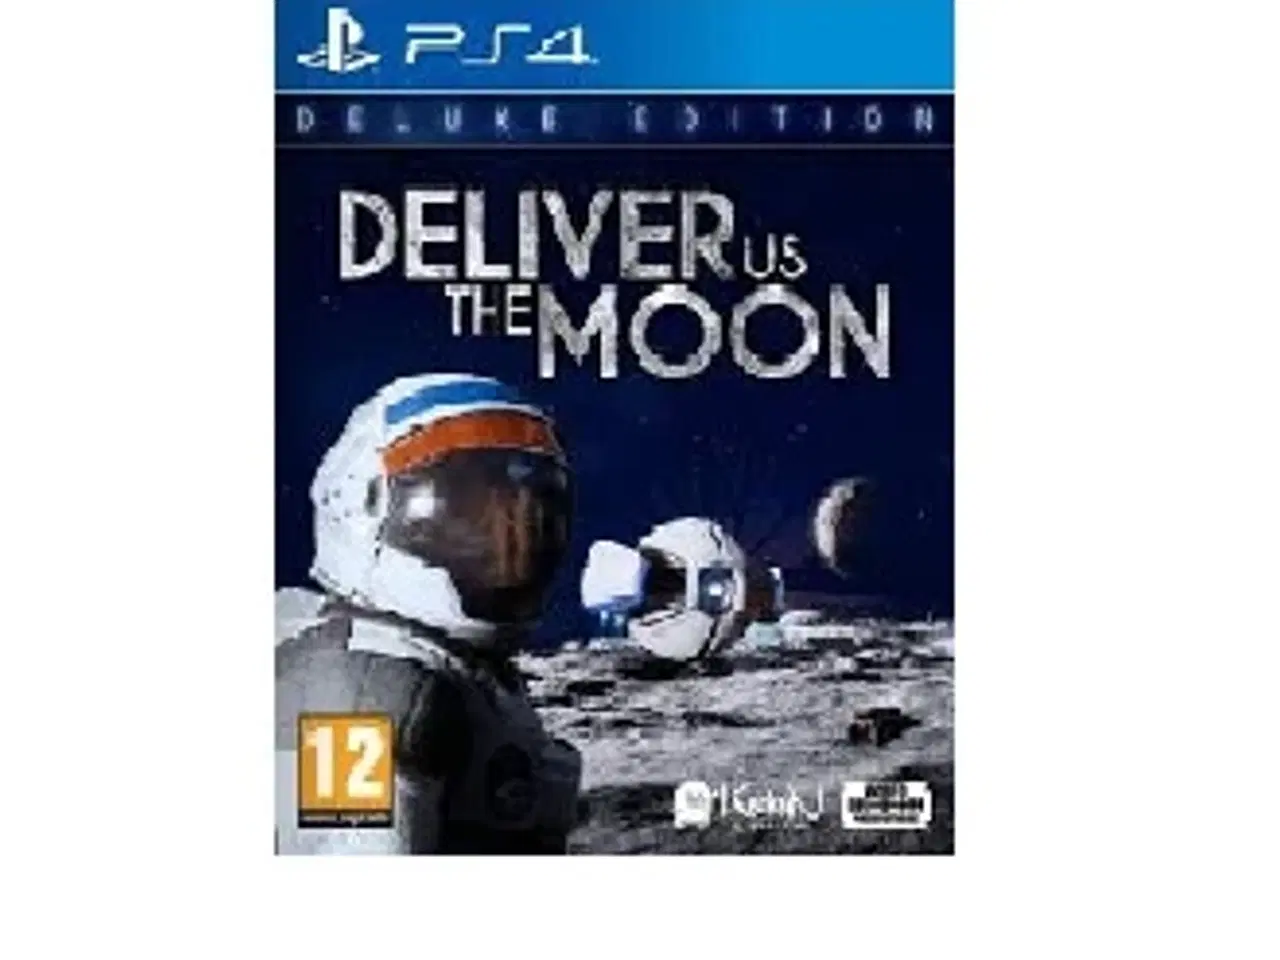 Billede 1 - Deliver Us The Moon Deluxe Edition